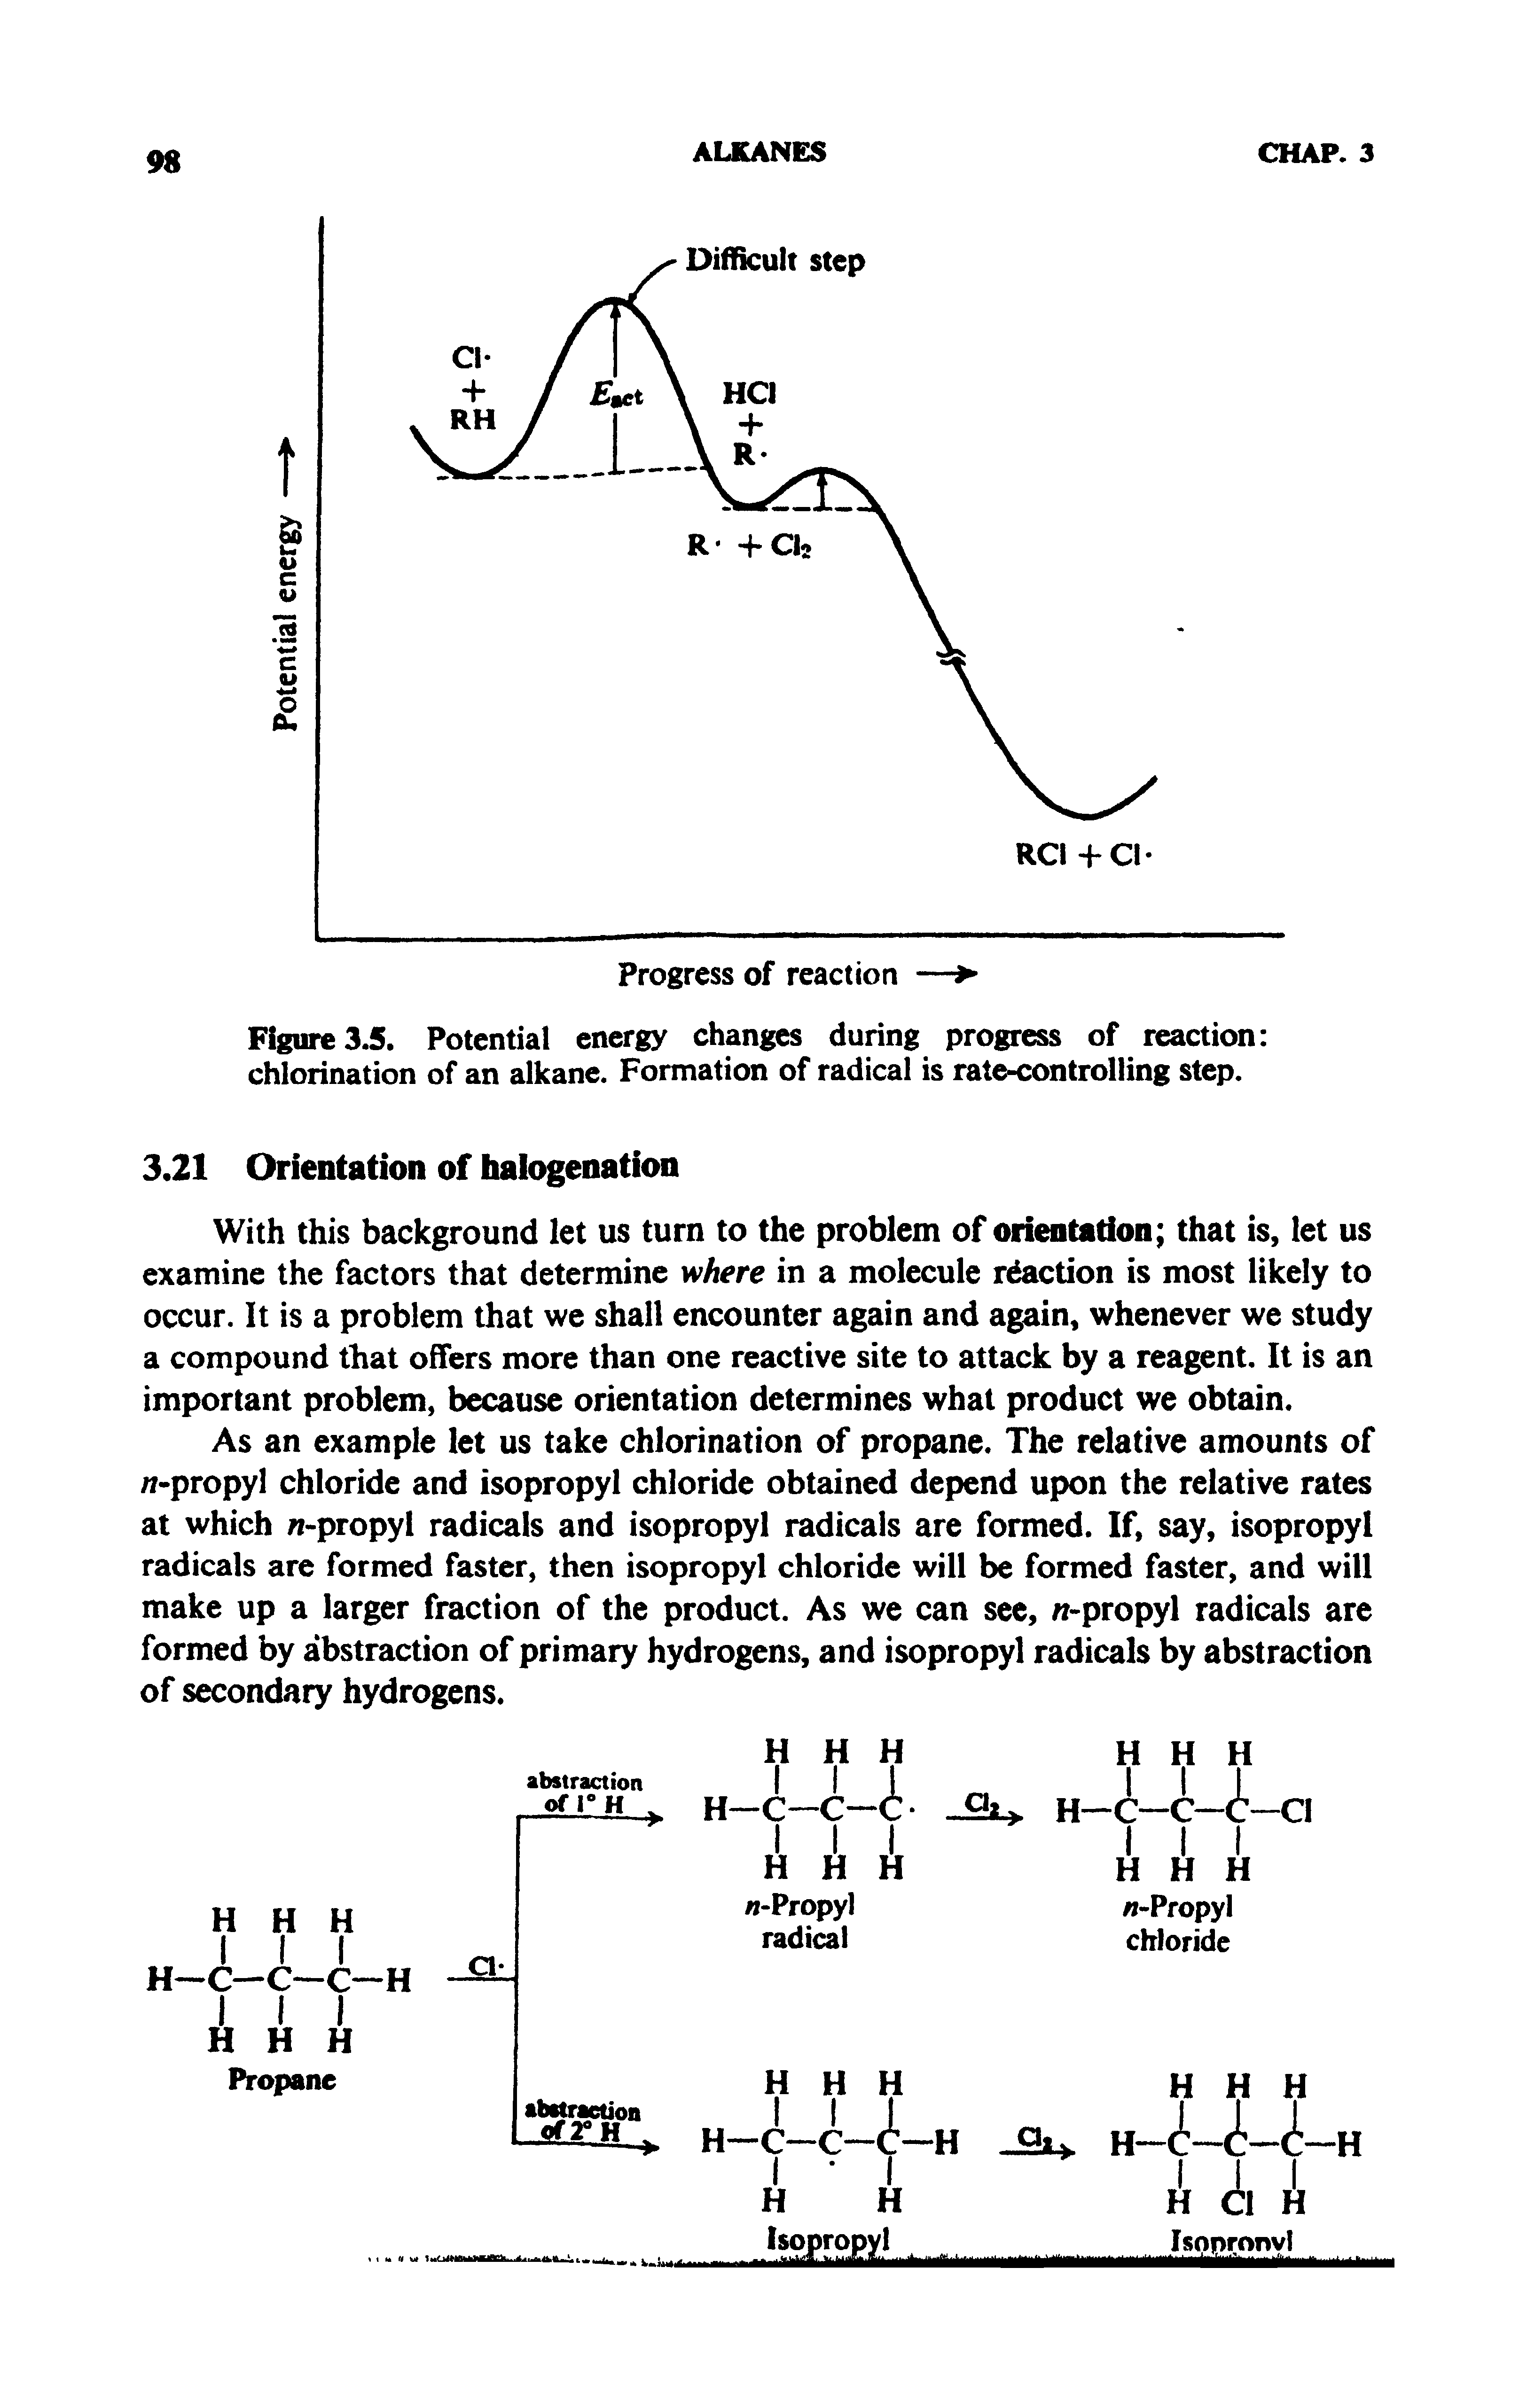 Figure 3.5. Potential energy changes during progress of reaction chlorination of an alkane. Formation of radical is rate-controlling step.